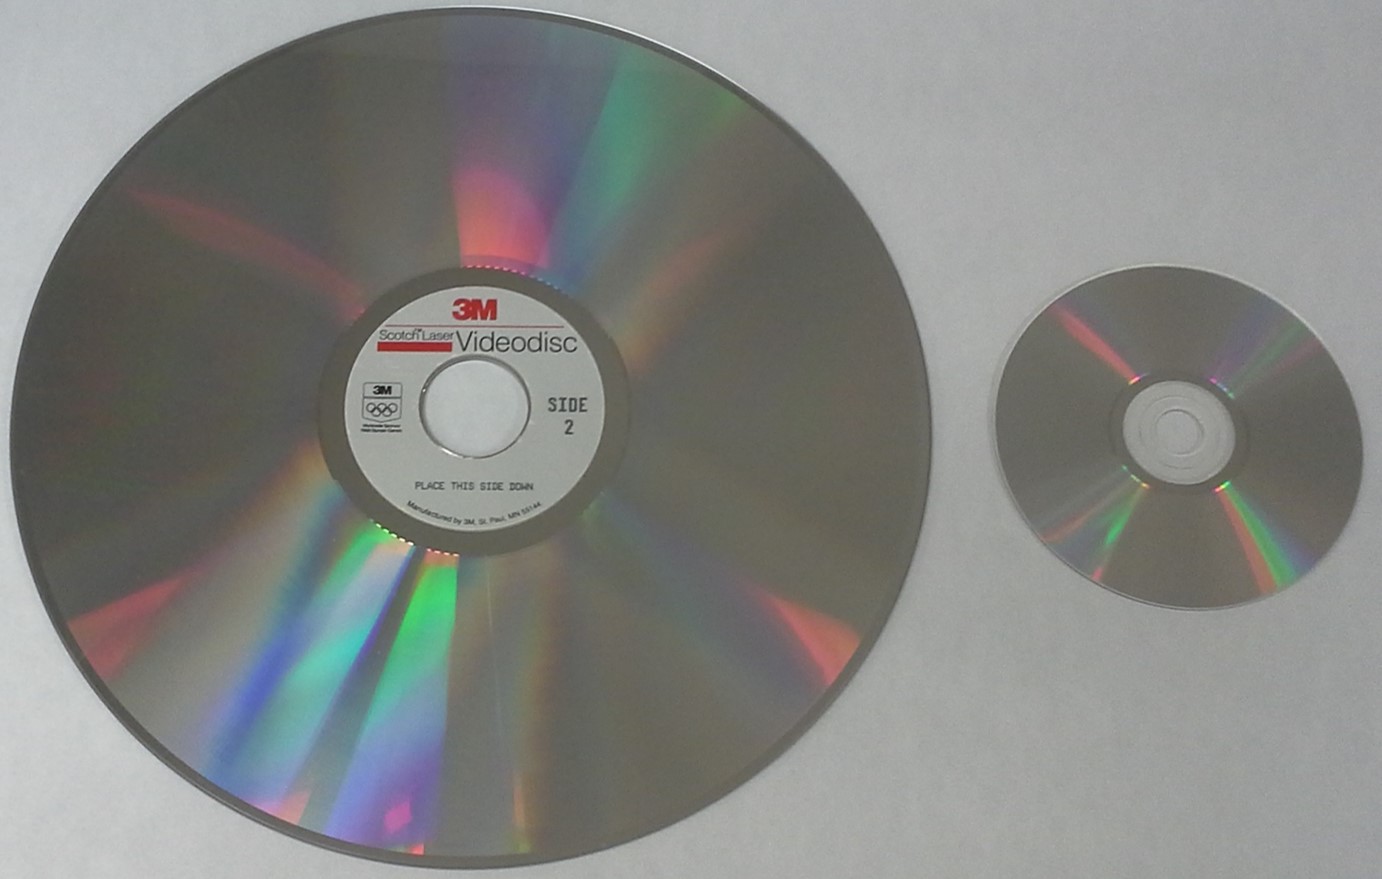 A picture of a 12-inch or 30cm one-sided laserdisc shown next to a standard CD.